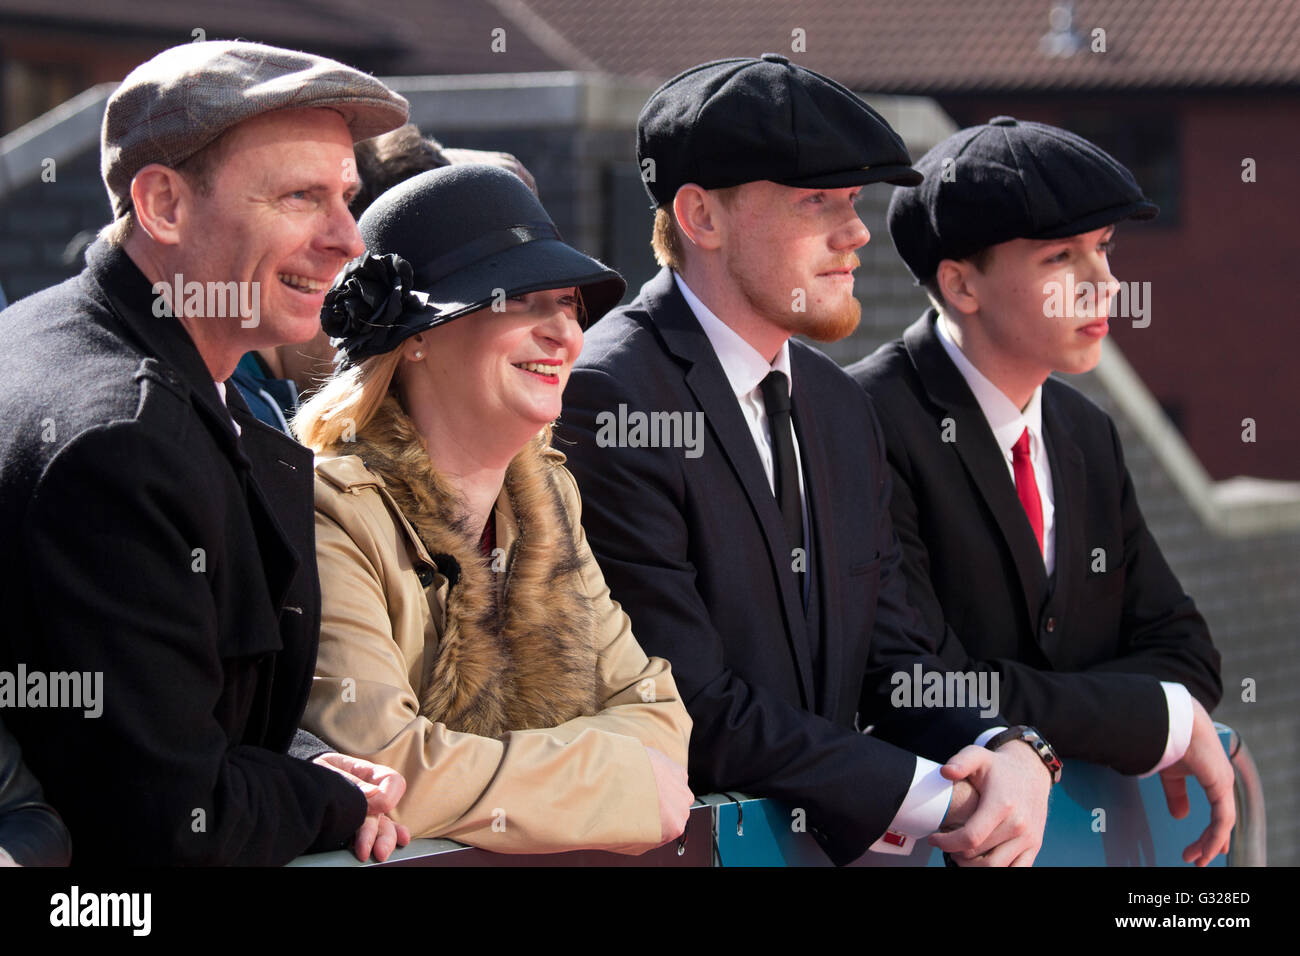 Fans of Peaky Blinders dressed in period costume at the premiere of season three in Birmingham Stock Photo